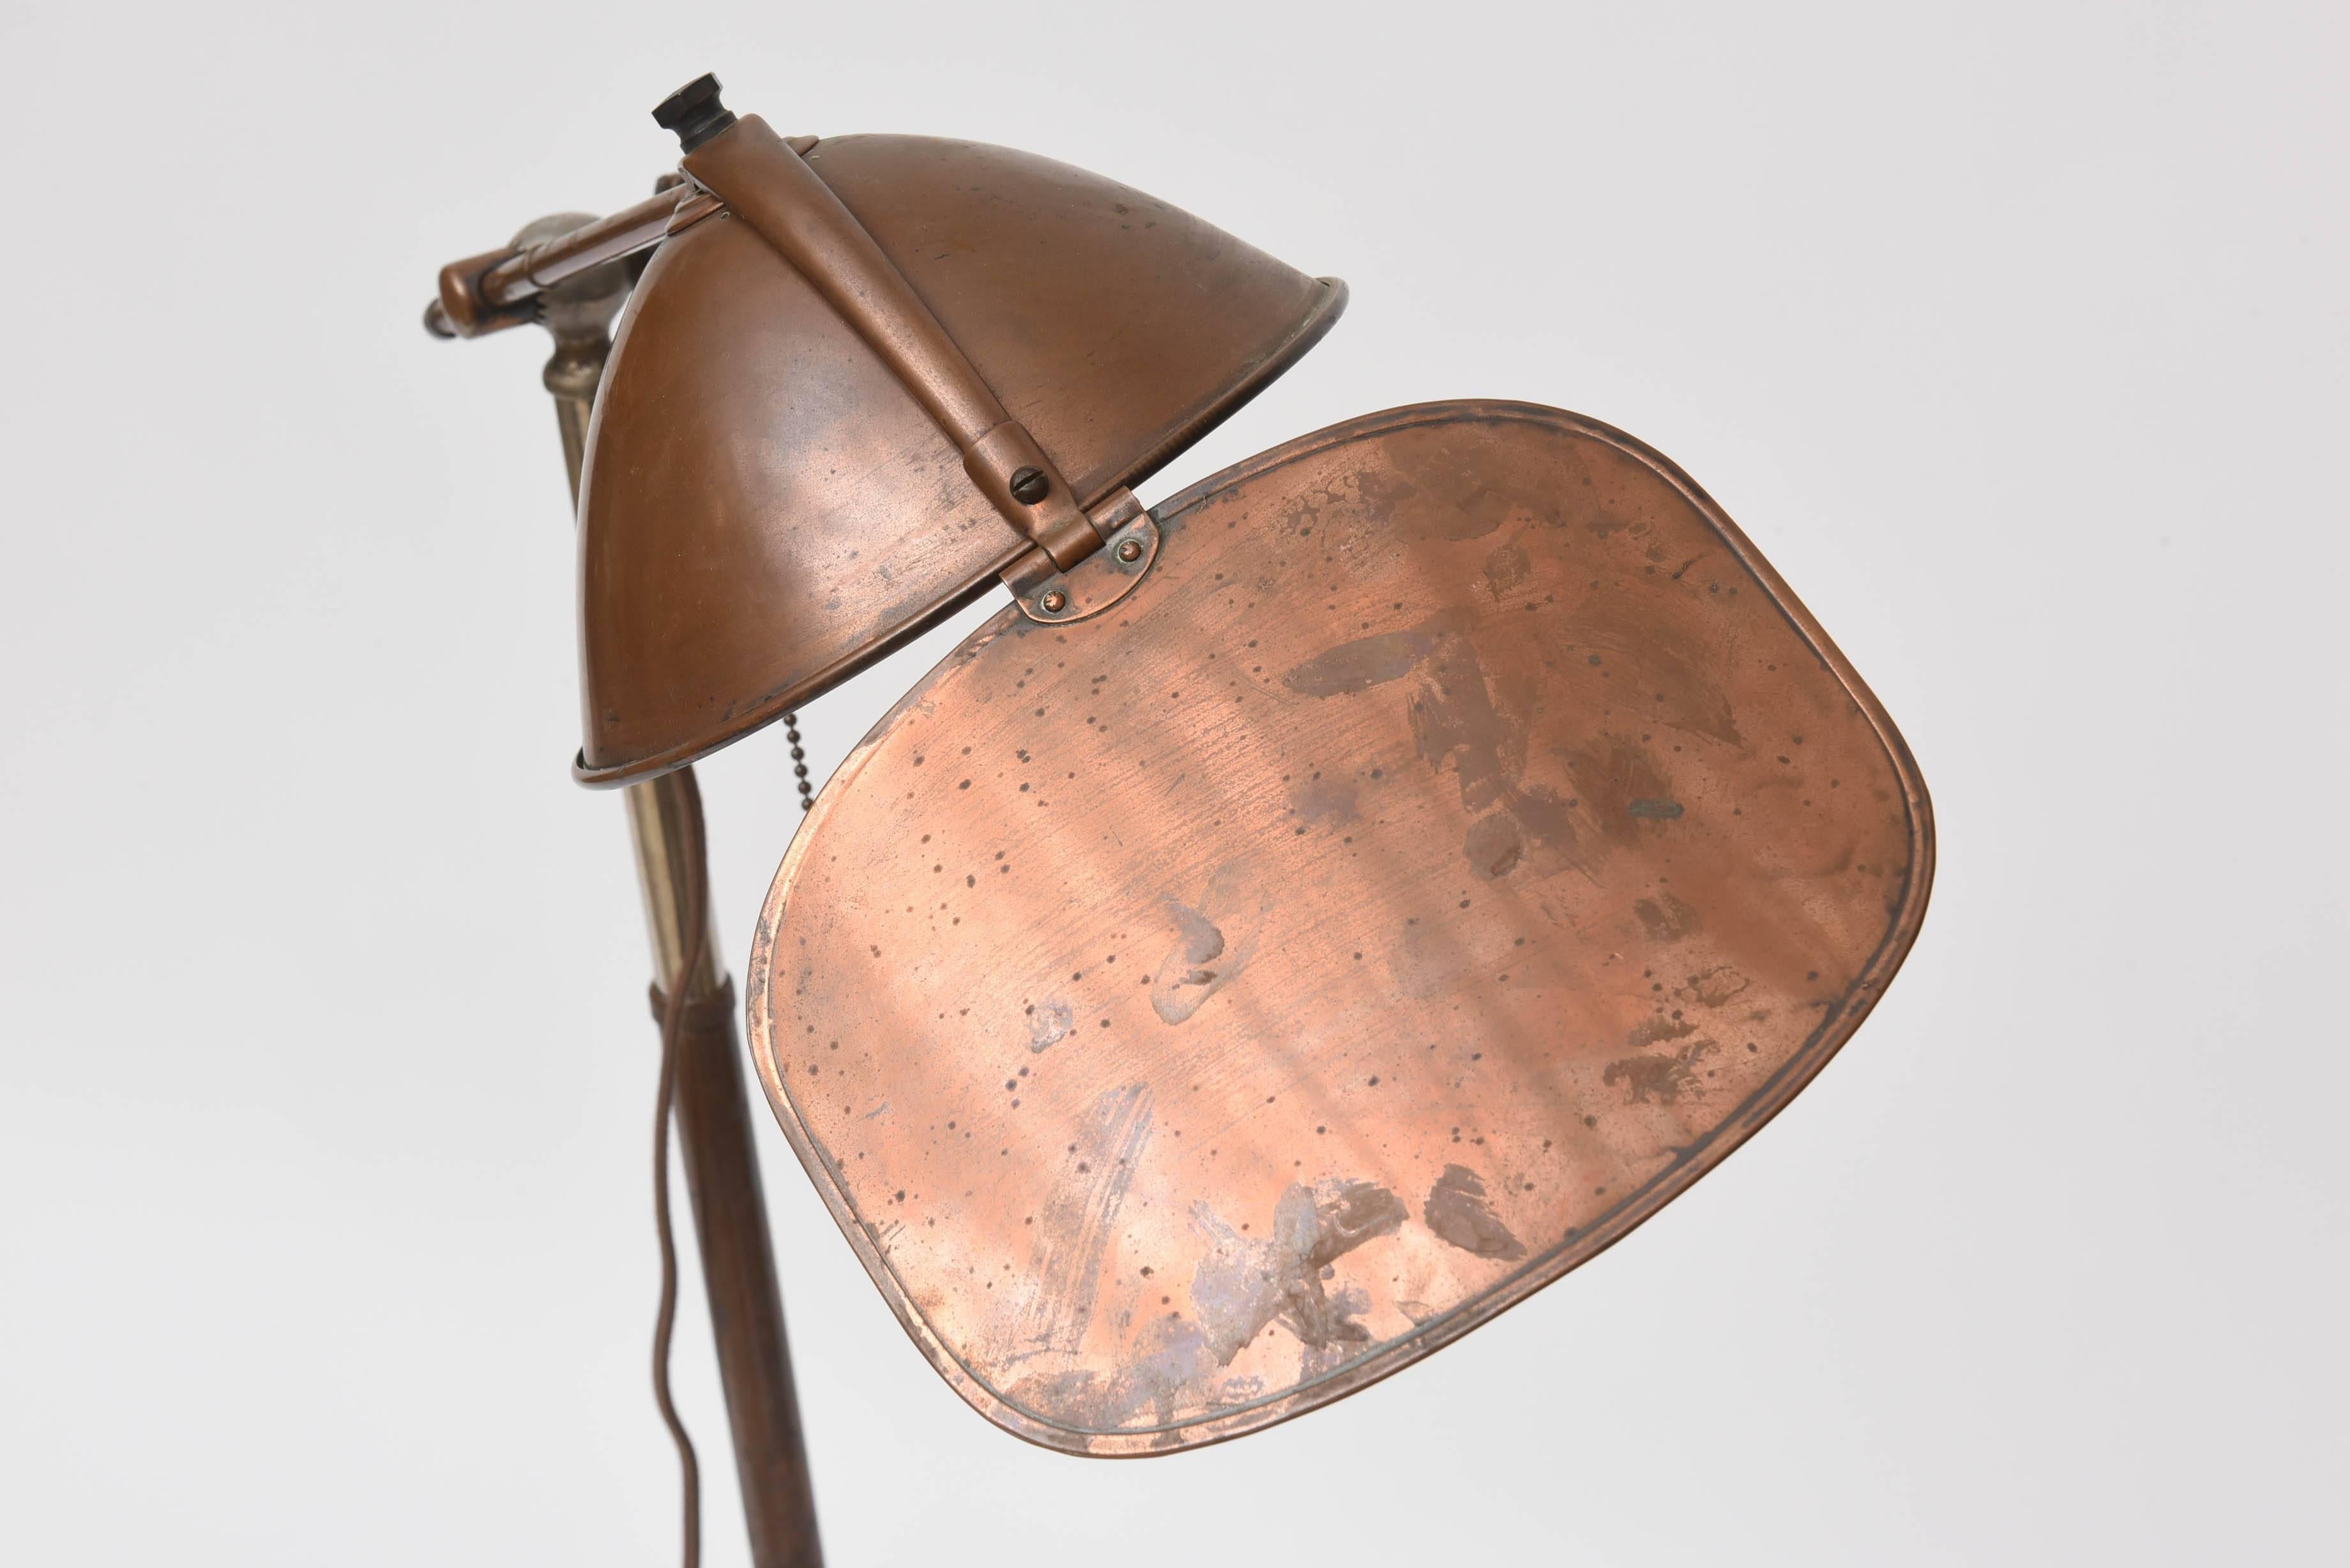 Early 1900s copper medical floor lamp by Lyhne Lamp Company. Visor moves up and down and side to side to diffuse the light. Height adjusts from 34